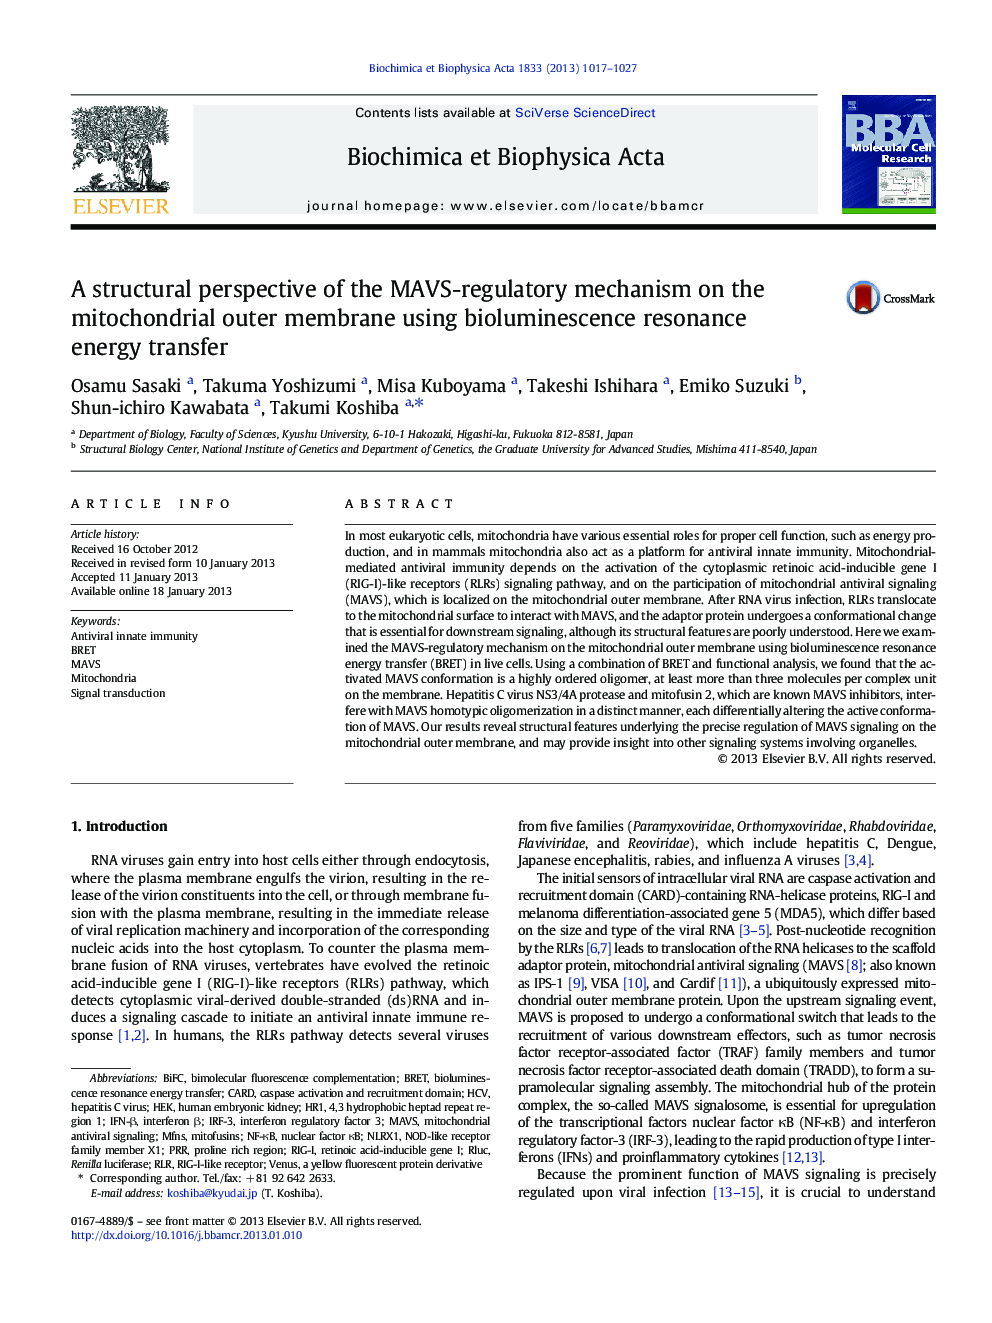 A structural perspective of the MAVS-regulatory mechanism on the mitochondrial outer membrane using bioluminescence resonance energy transfer